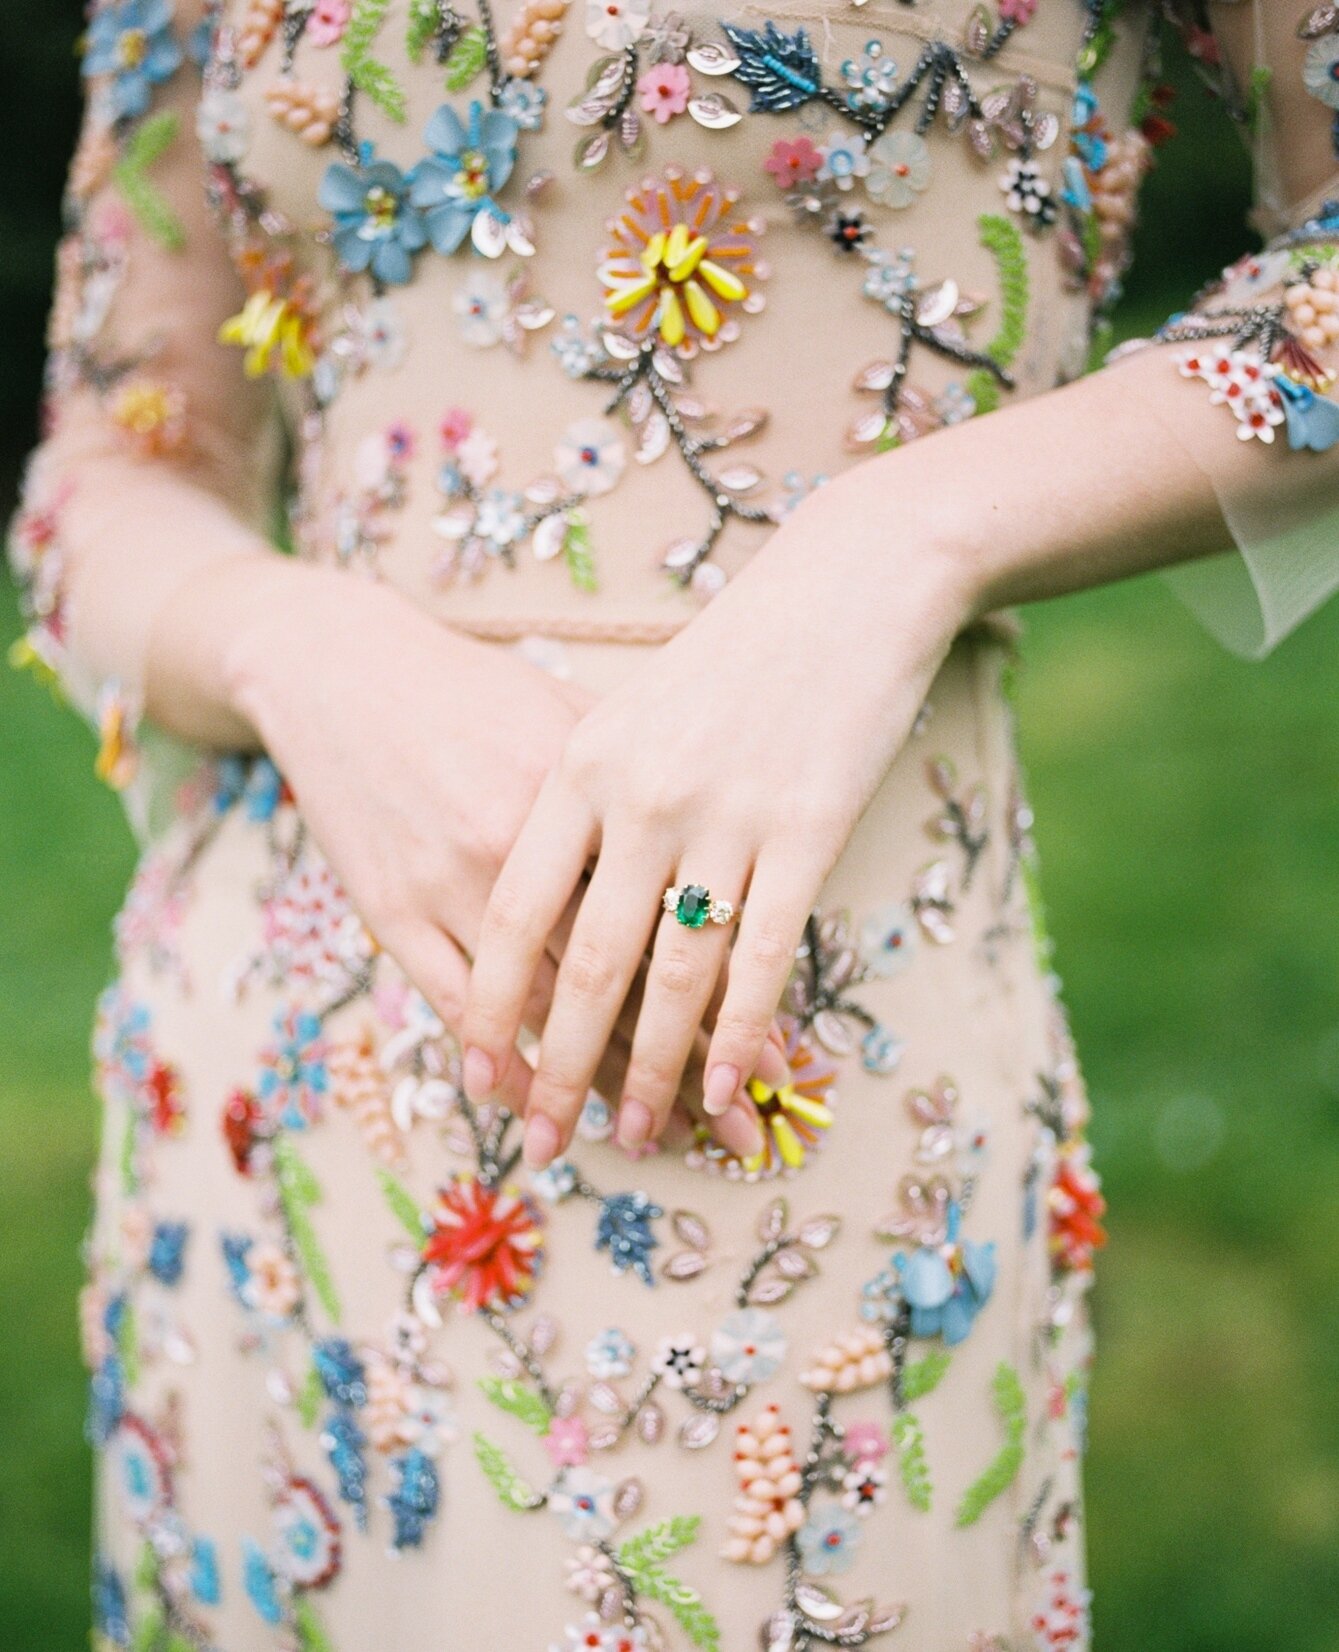 Zoey on film with the most gorgeous emerald ring from Victor Barbone.  YES to all the colors!⁠
⁠
Venue: Sezincote House @camillajpeake ⁠
Workshop Host: AMV Retreats @amv_retreats⁠
Wedding Planner, Styling + Design: AMV Weddings @amv_weddings⁠
Floral 